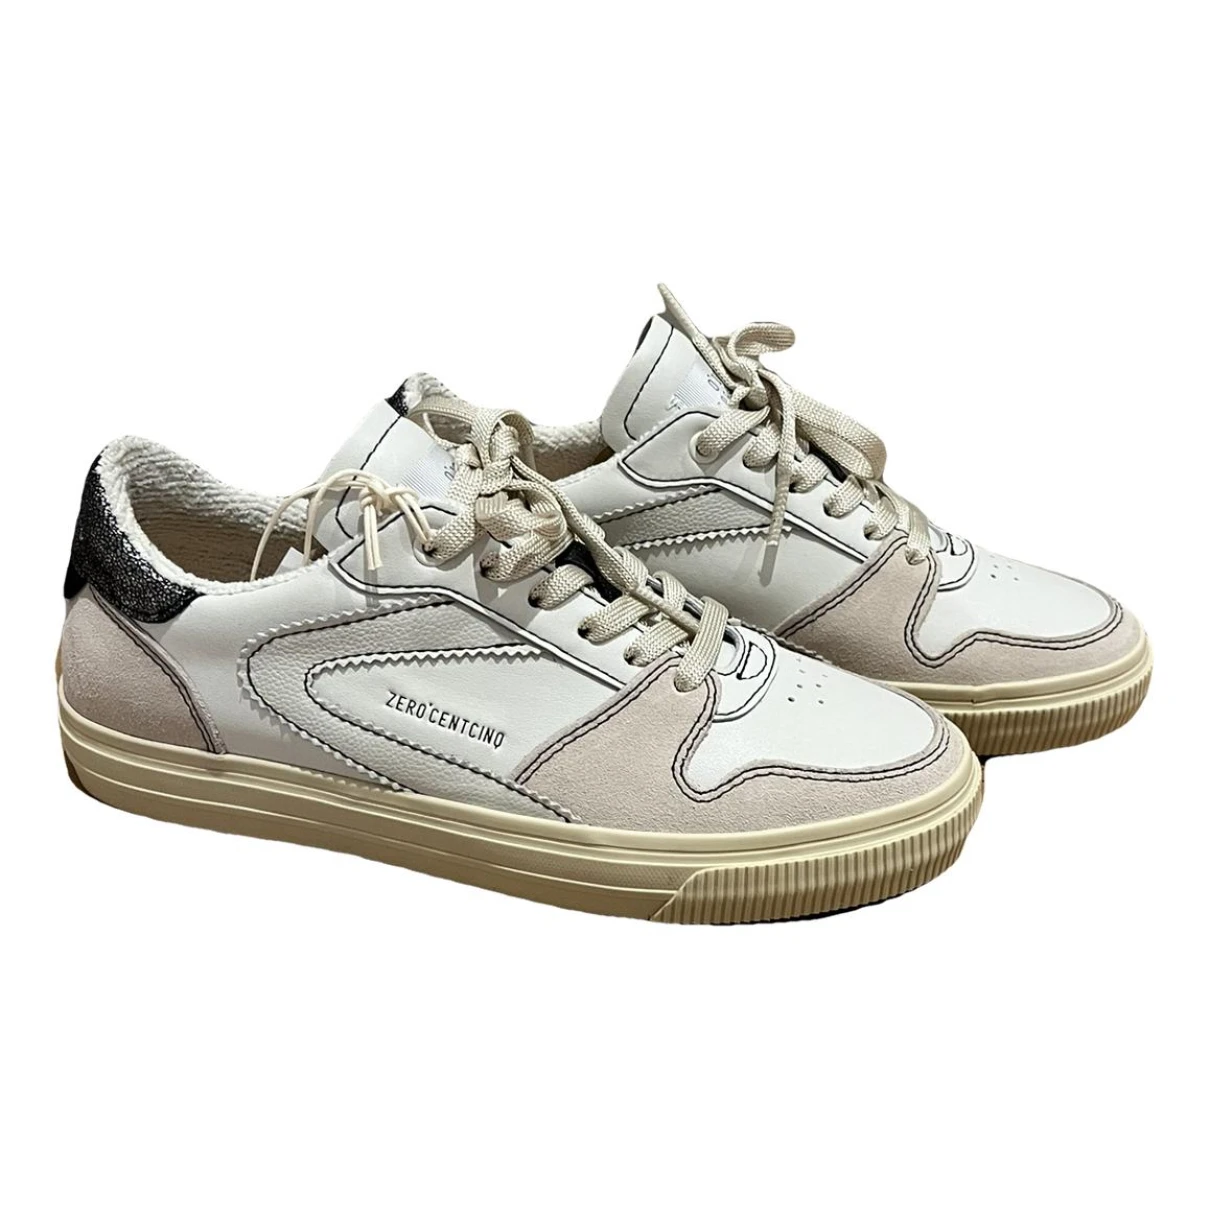 Pre-owned Zero Cent Cinq Leather Trainers In White